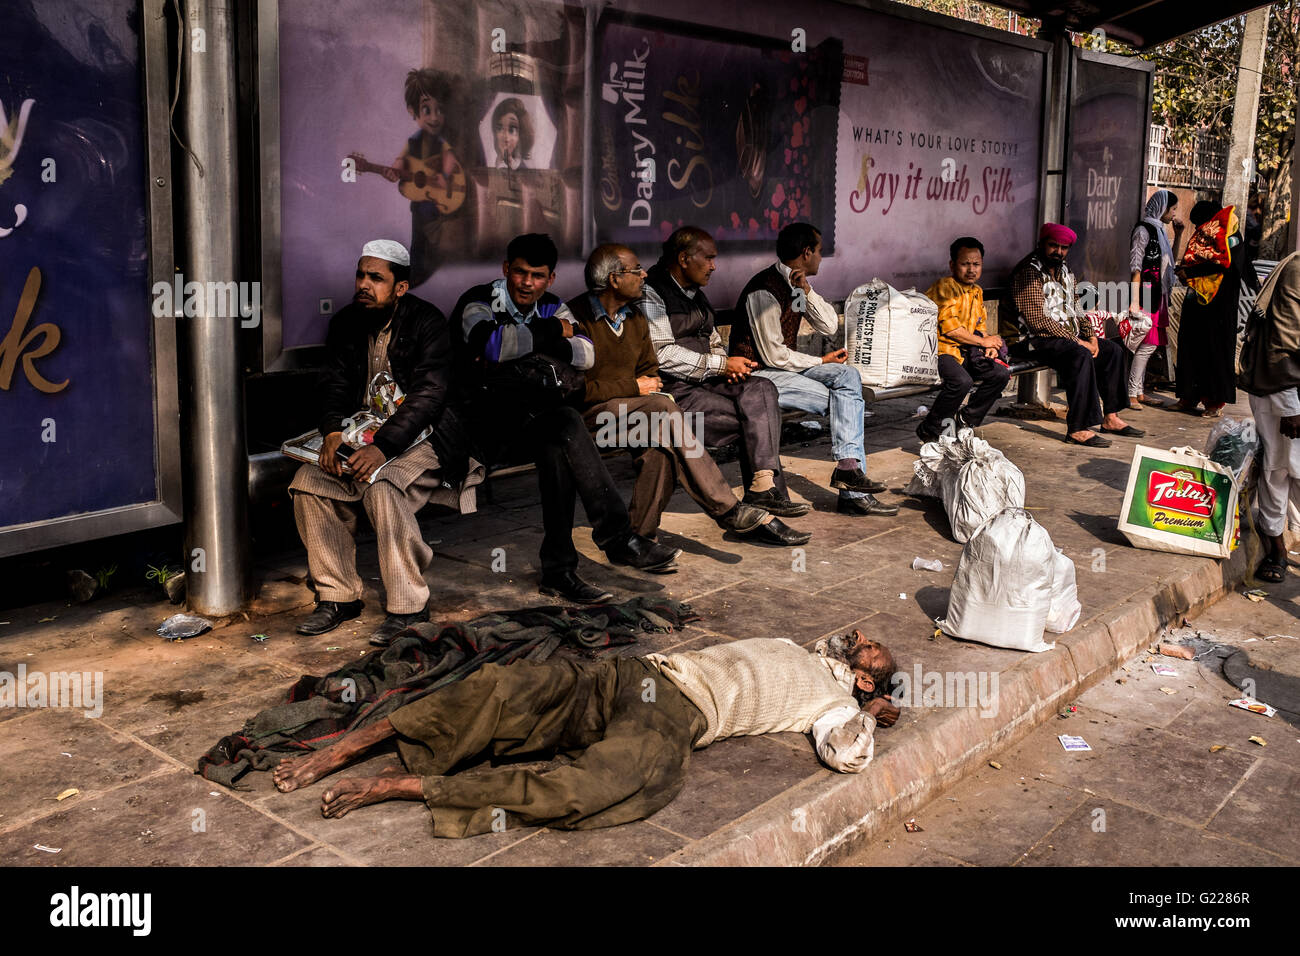 Man passed out on floor as other people wait at a bus stop in Delhi, India Stock Photo